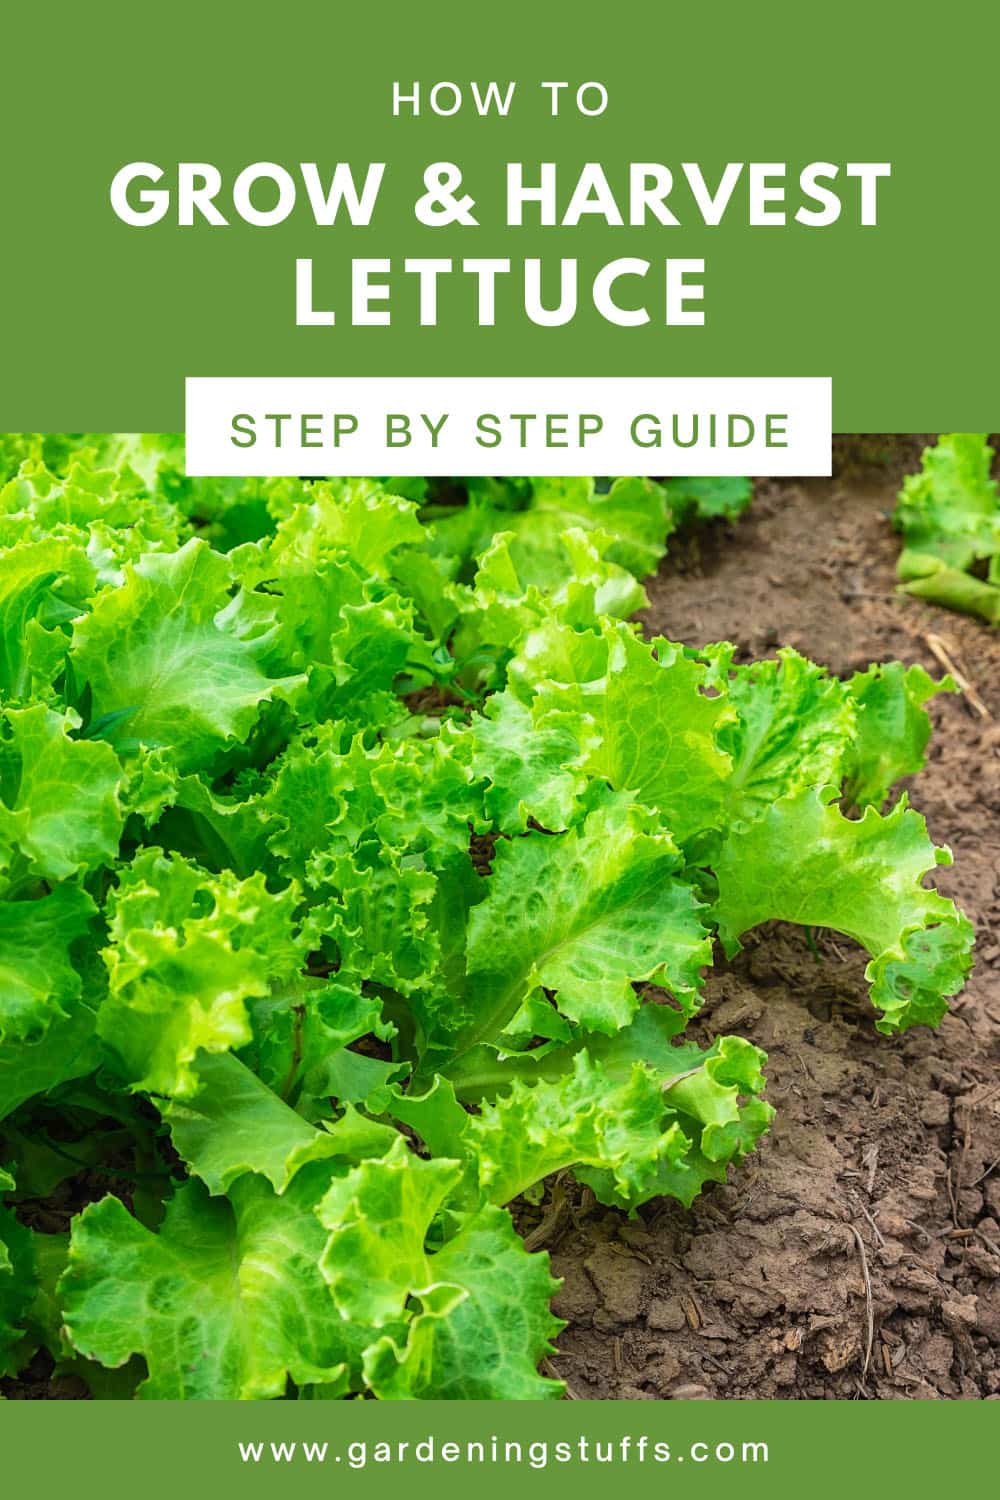 If you’ve ever considered growing your own lettuce to liven up your salads, you may have found it daunting given all the different types. Luckily, all types of lettuce are fairly easy to grow and make a great starter for a vegetable garden. Read on to learn more about the different types of lettuce and how to grow them.